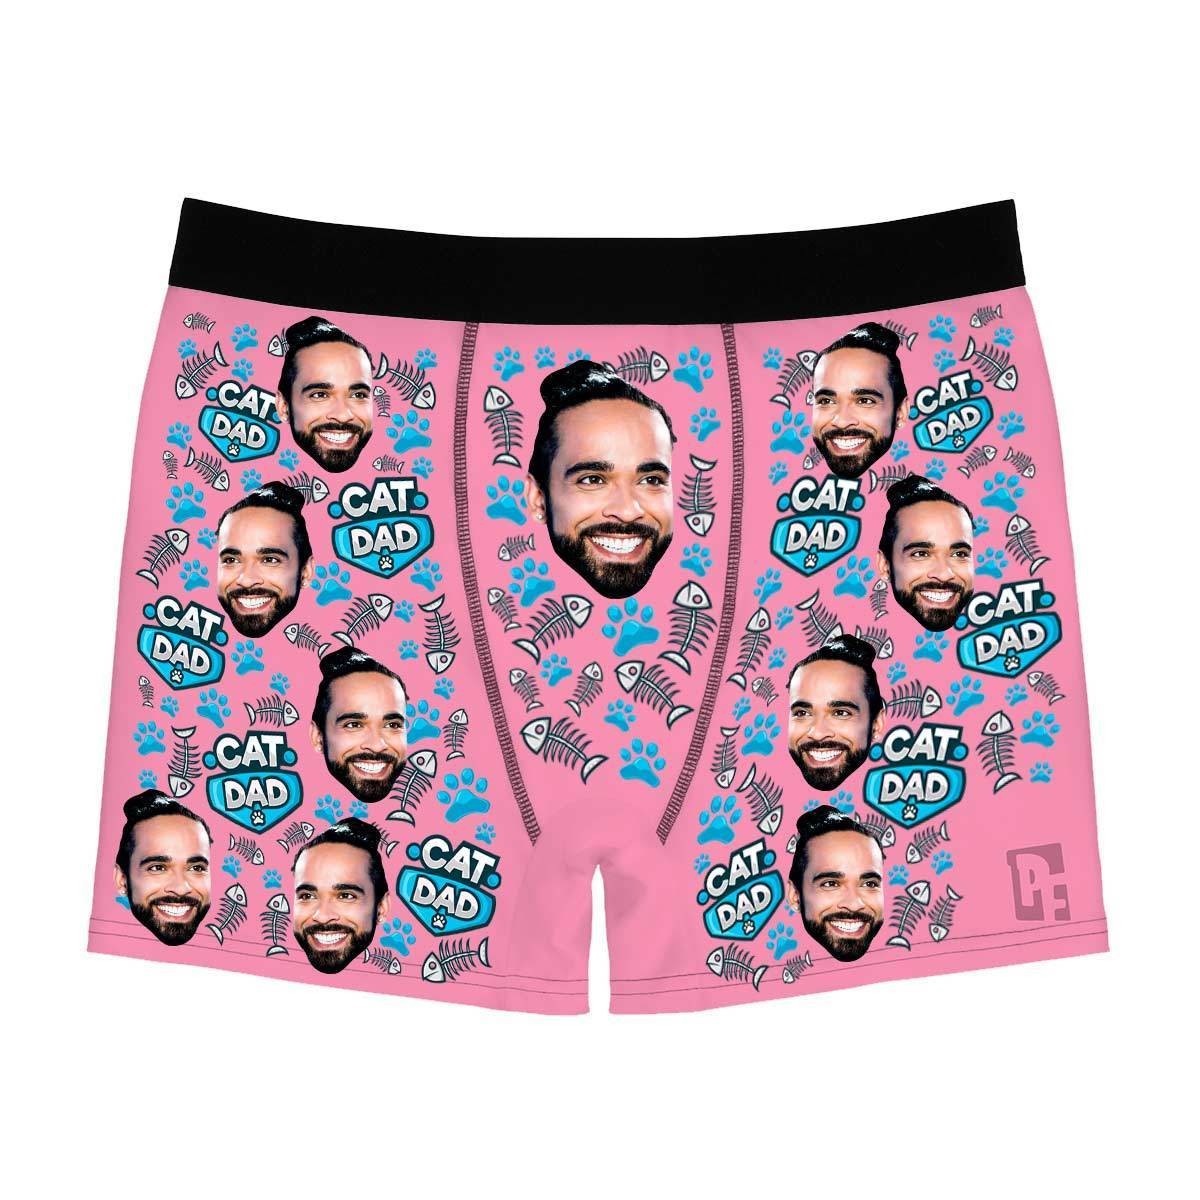 Pink Cat dad men's boxer briefs personalized with photo printed on them